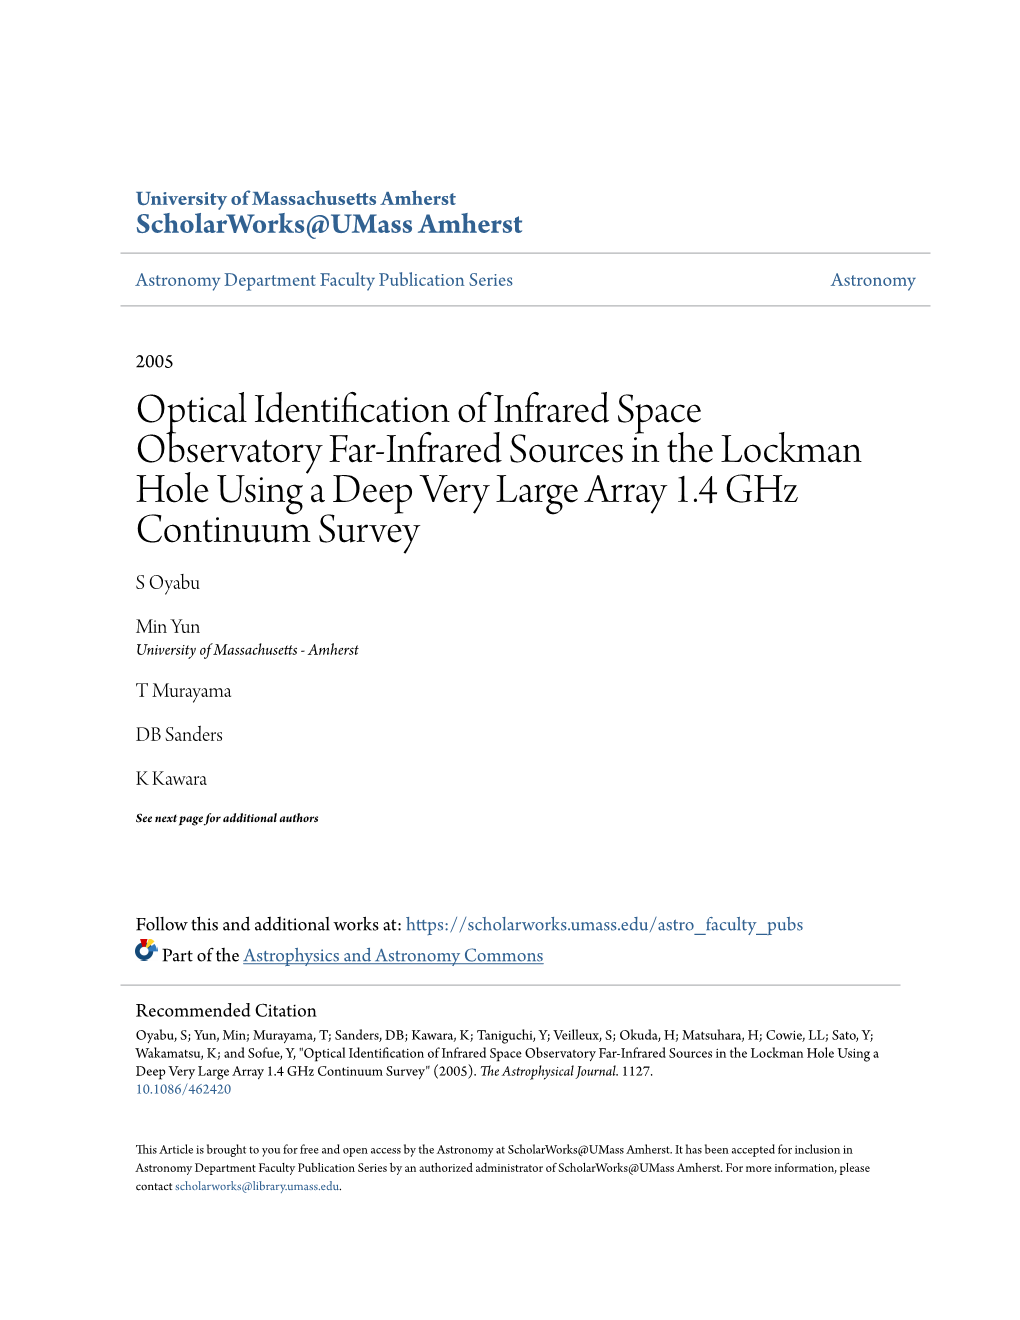 Optical Identification of Infrared Space Observatory Far-Infrared Sources in the Lockman Hole Using a Deep Very Large Array 1.4 Ghz Continuum Survey S Oyabu